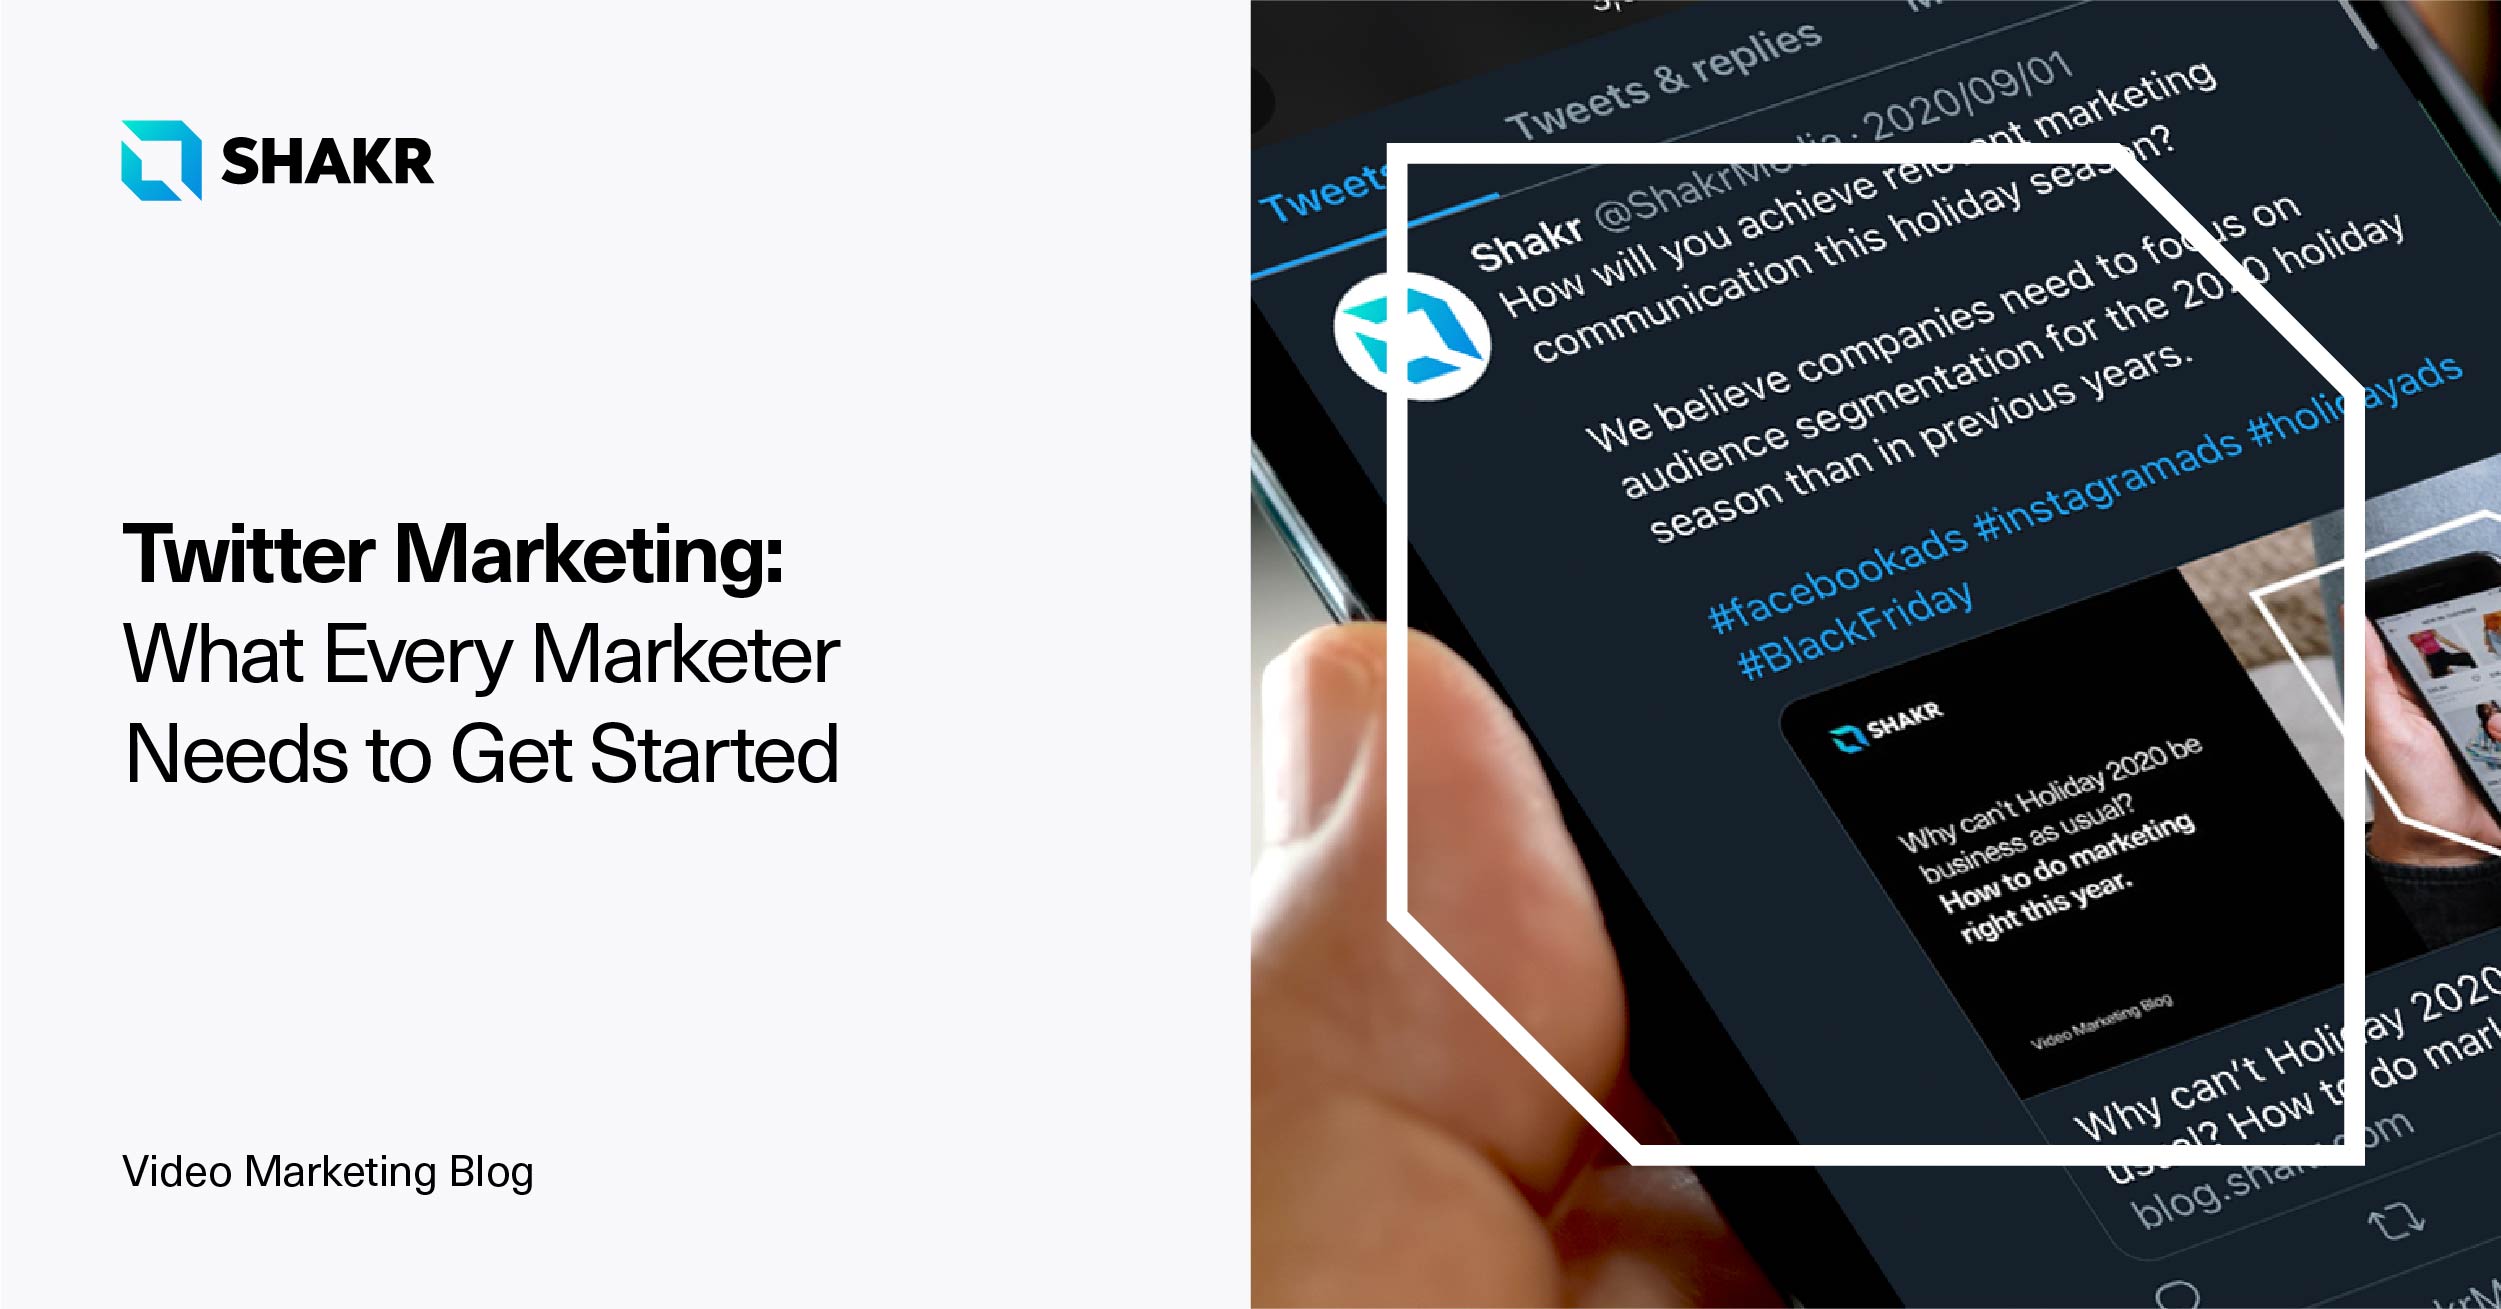 Twitter Marketing: What Every Marketer Needs to Get Started